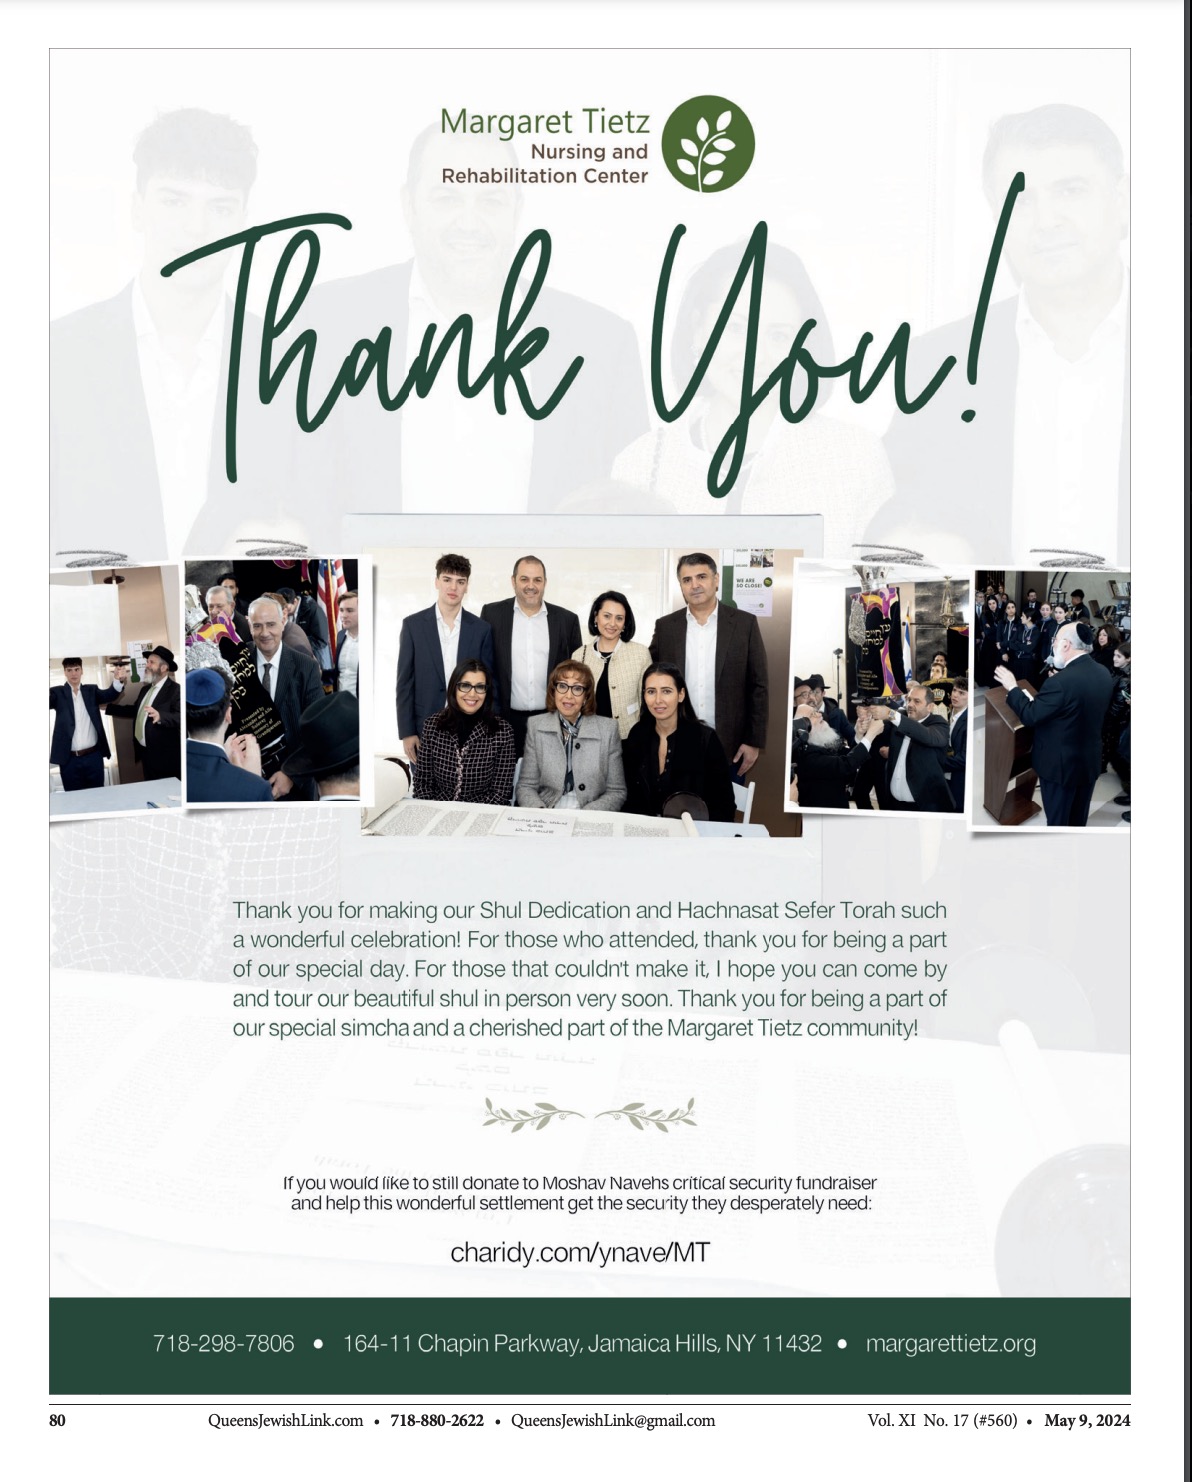 A thank you message from the Margaret Tietz Nursing and Rehabilitation Center, expressing gratitude for the attendees of their Shul Dedication and Hachnasat Sefer Torah celebration, with contact information and donation details included. Several photos of the event are shown, including a group photo of attendees and scenes from the celebration.